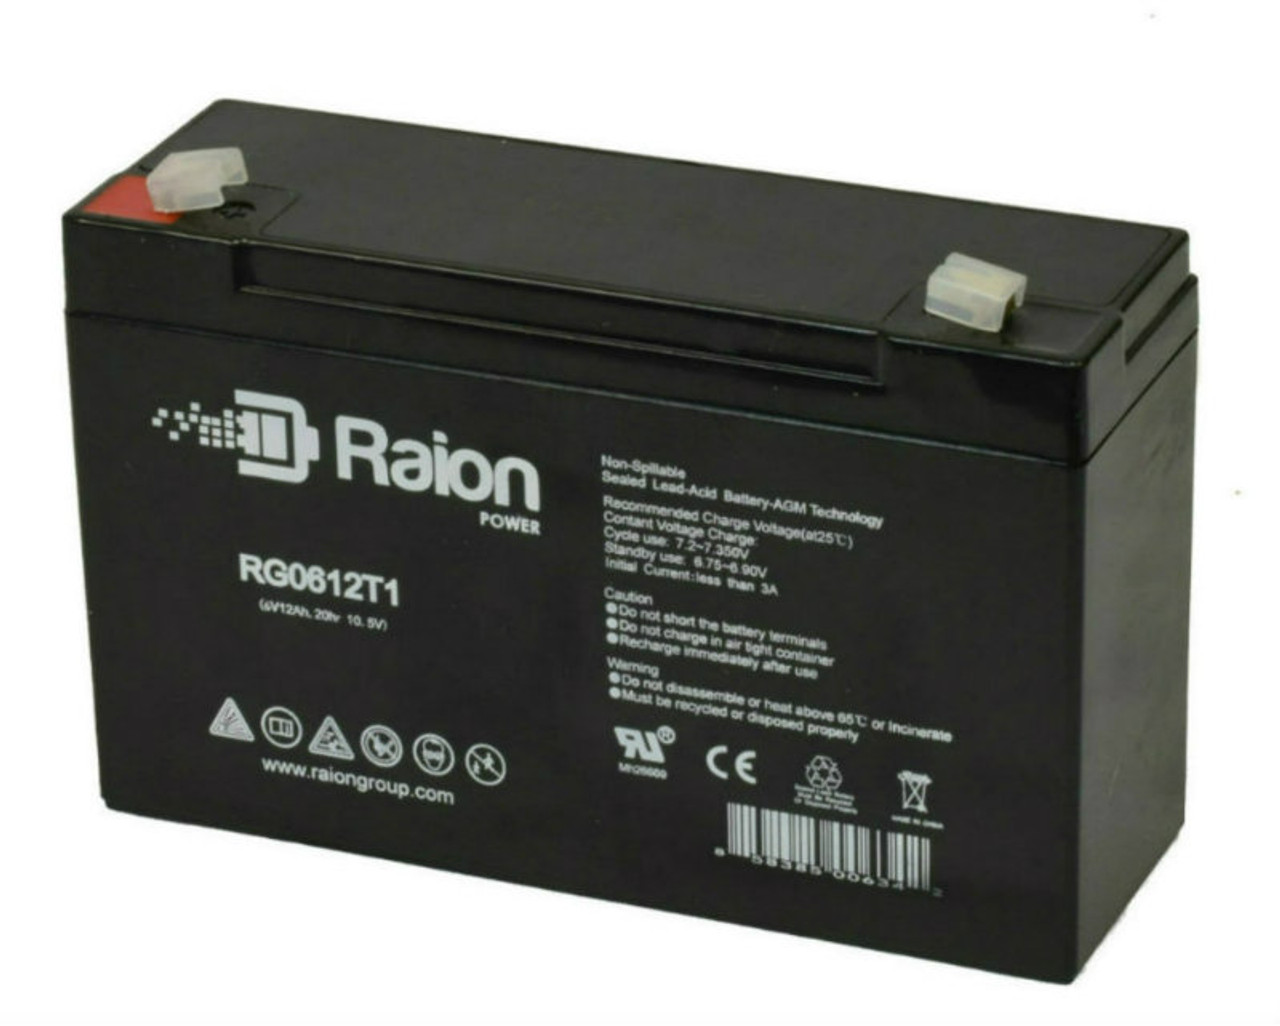 Raion Power RG06120T1 Replacement 6V 12Ah Emergency Light Battery for Sure-Lites SLHC12